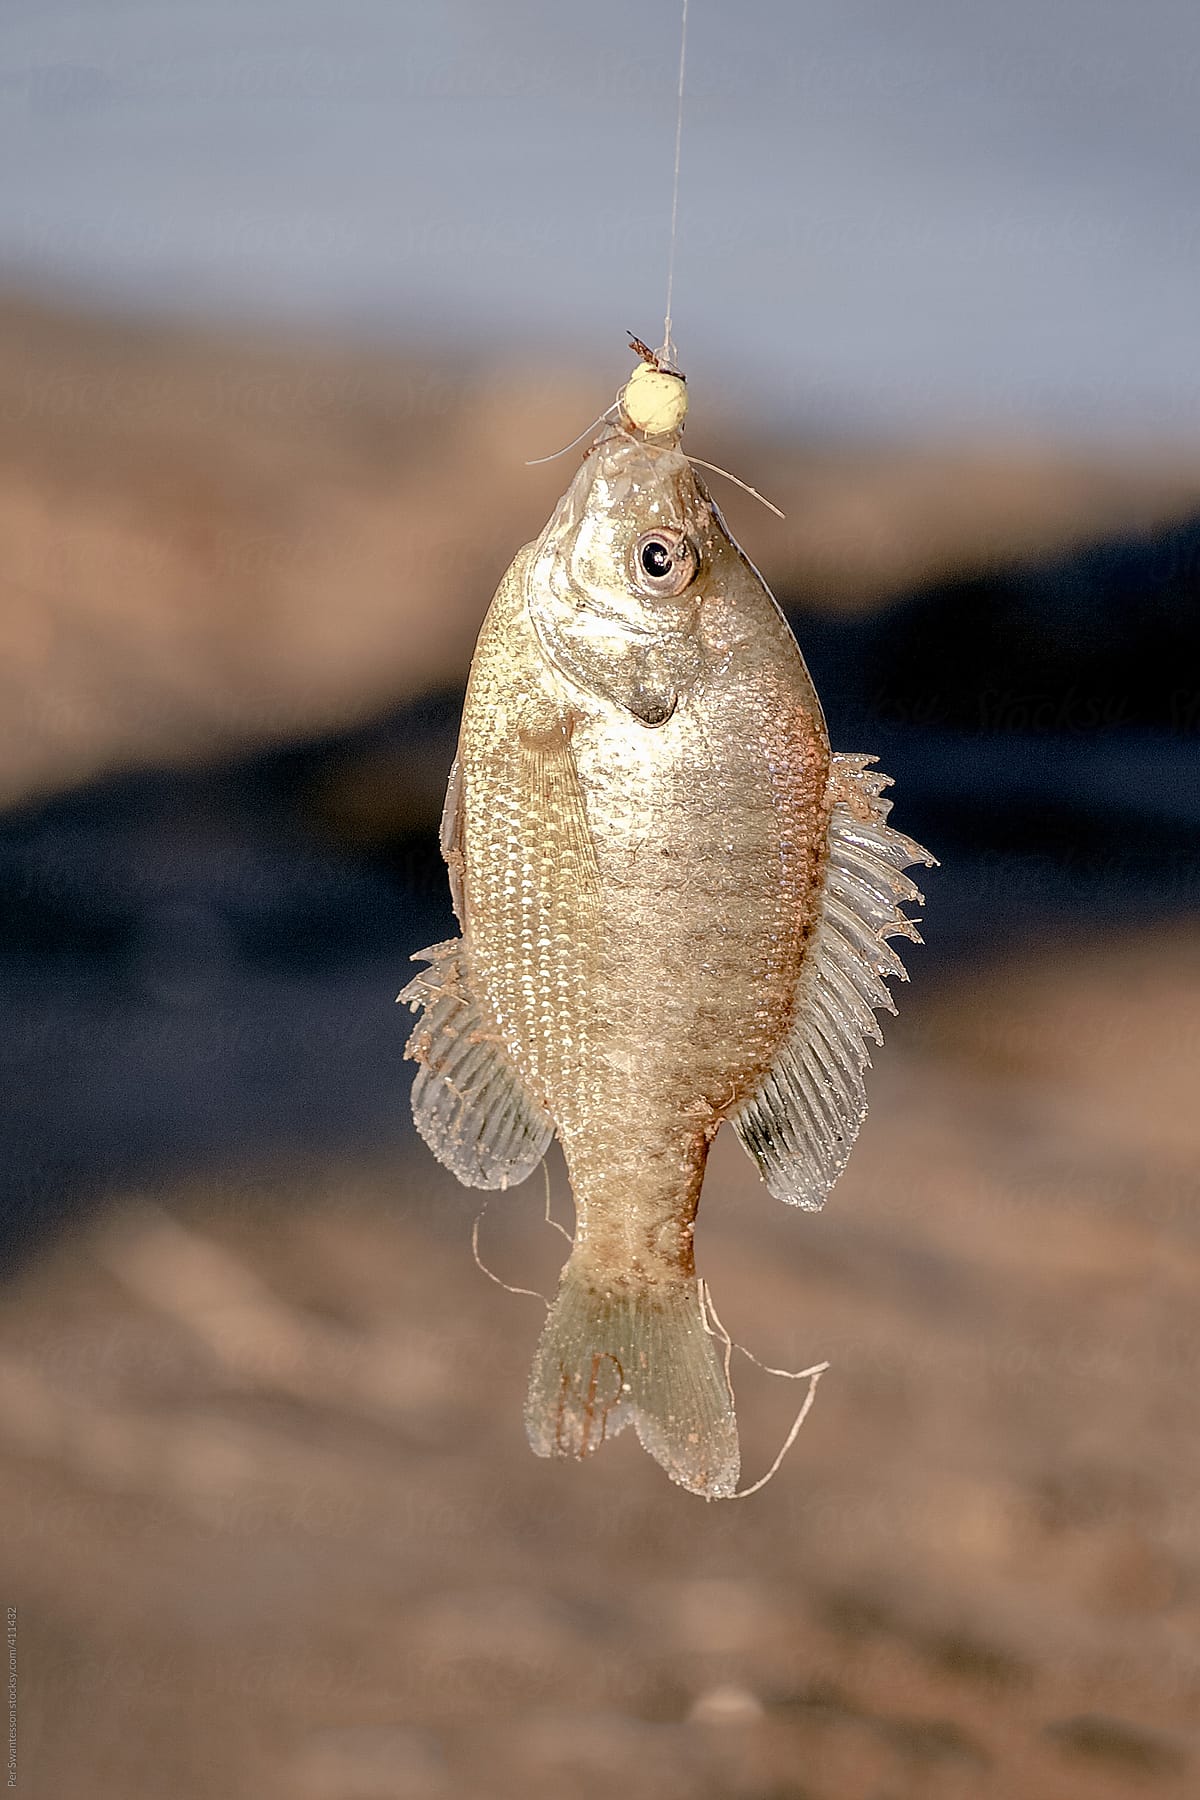 Fresh Catch Of Small Fish In Colorado River by Stocksy